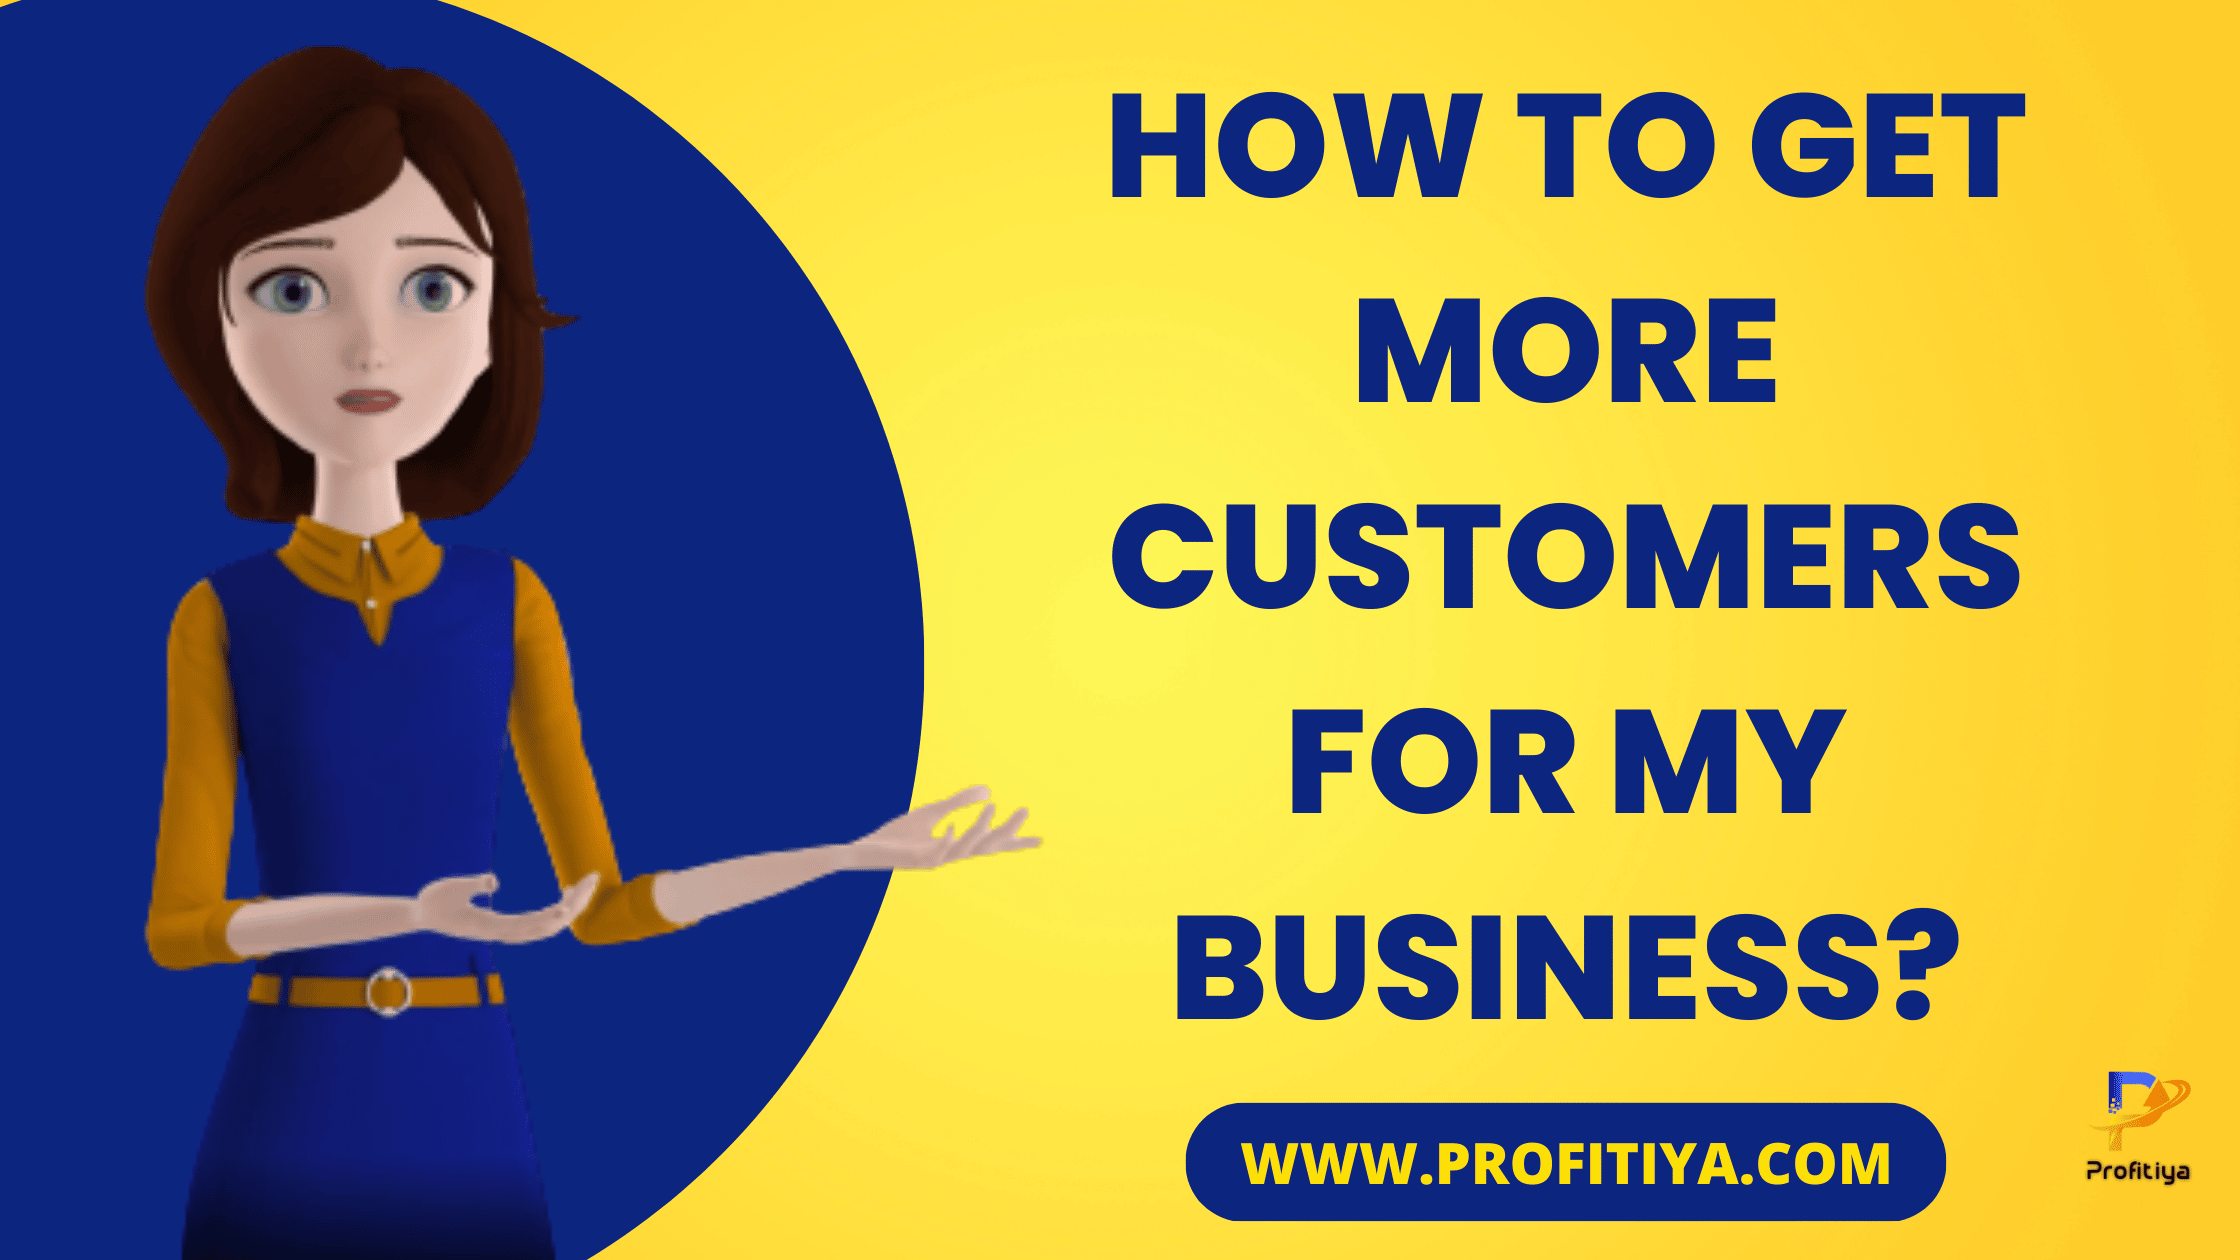 How To Get More Customers For My Business?